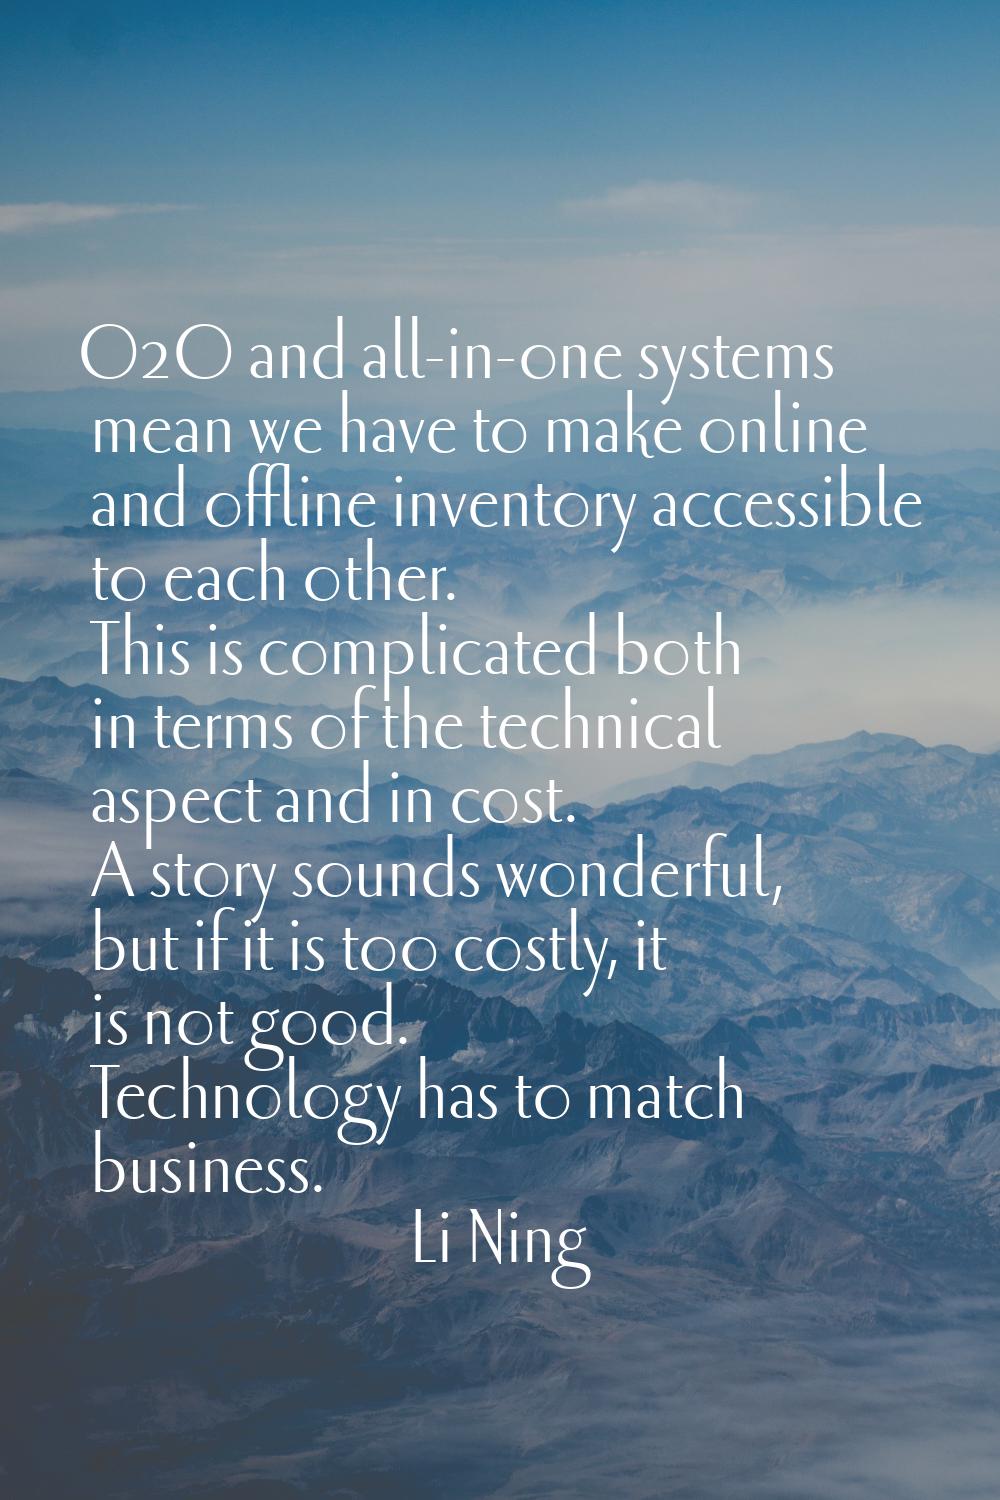 O2O and all-in-one systems mean we have to make online and offline inventory accessible to each oth